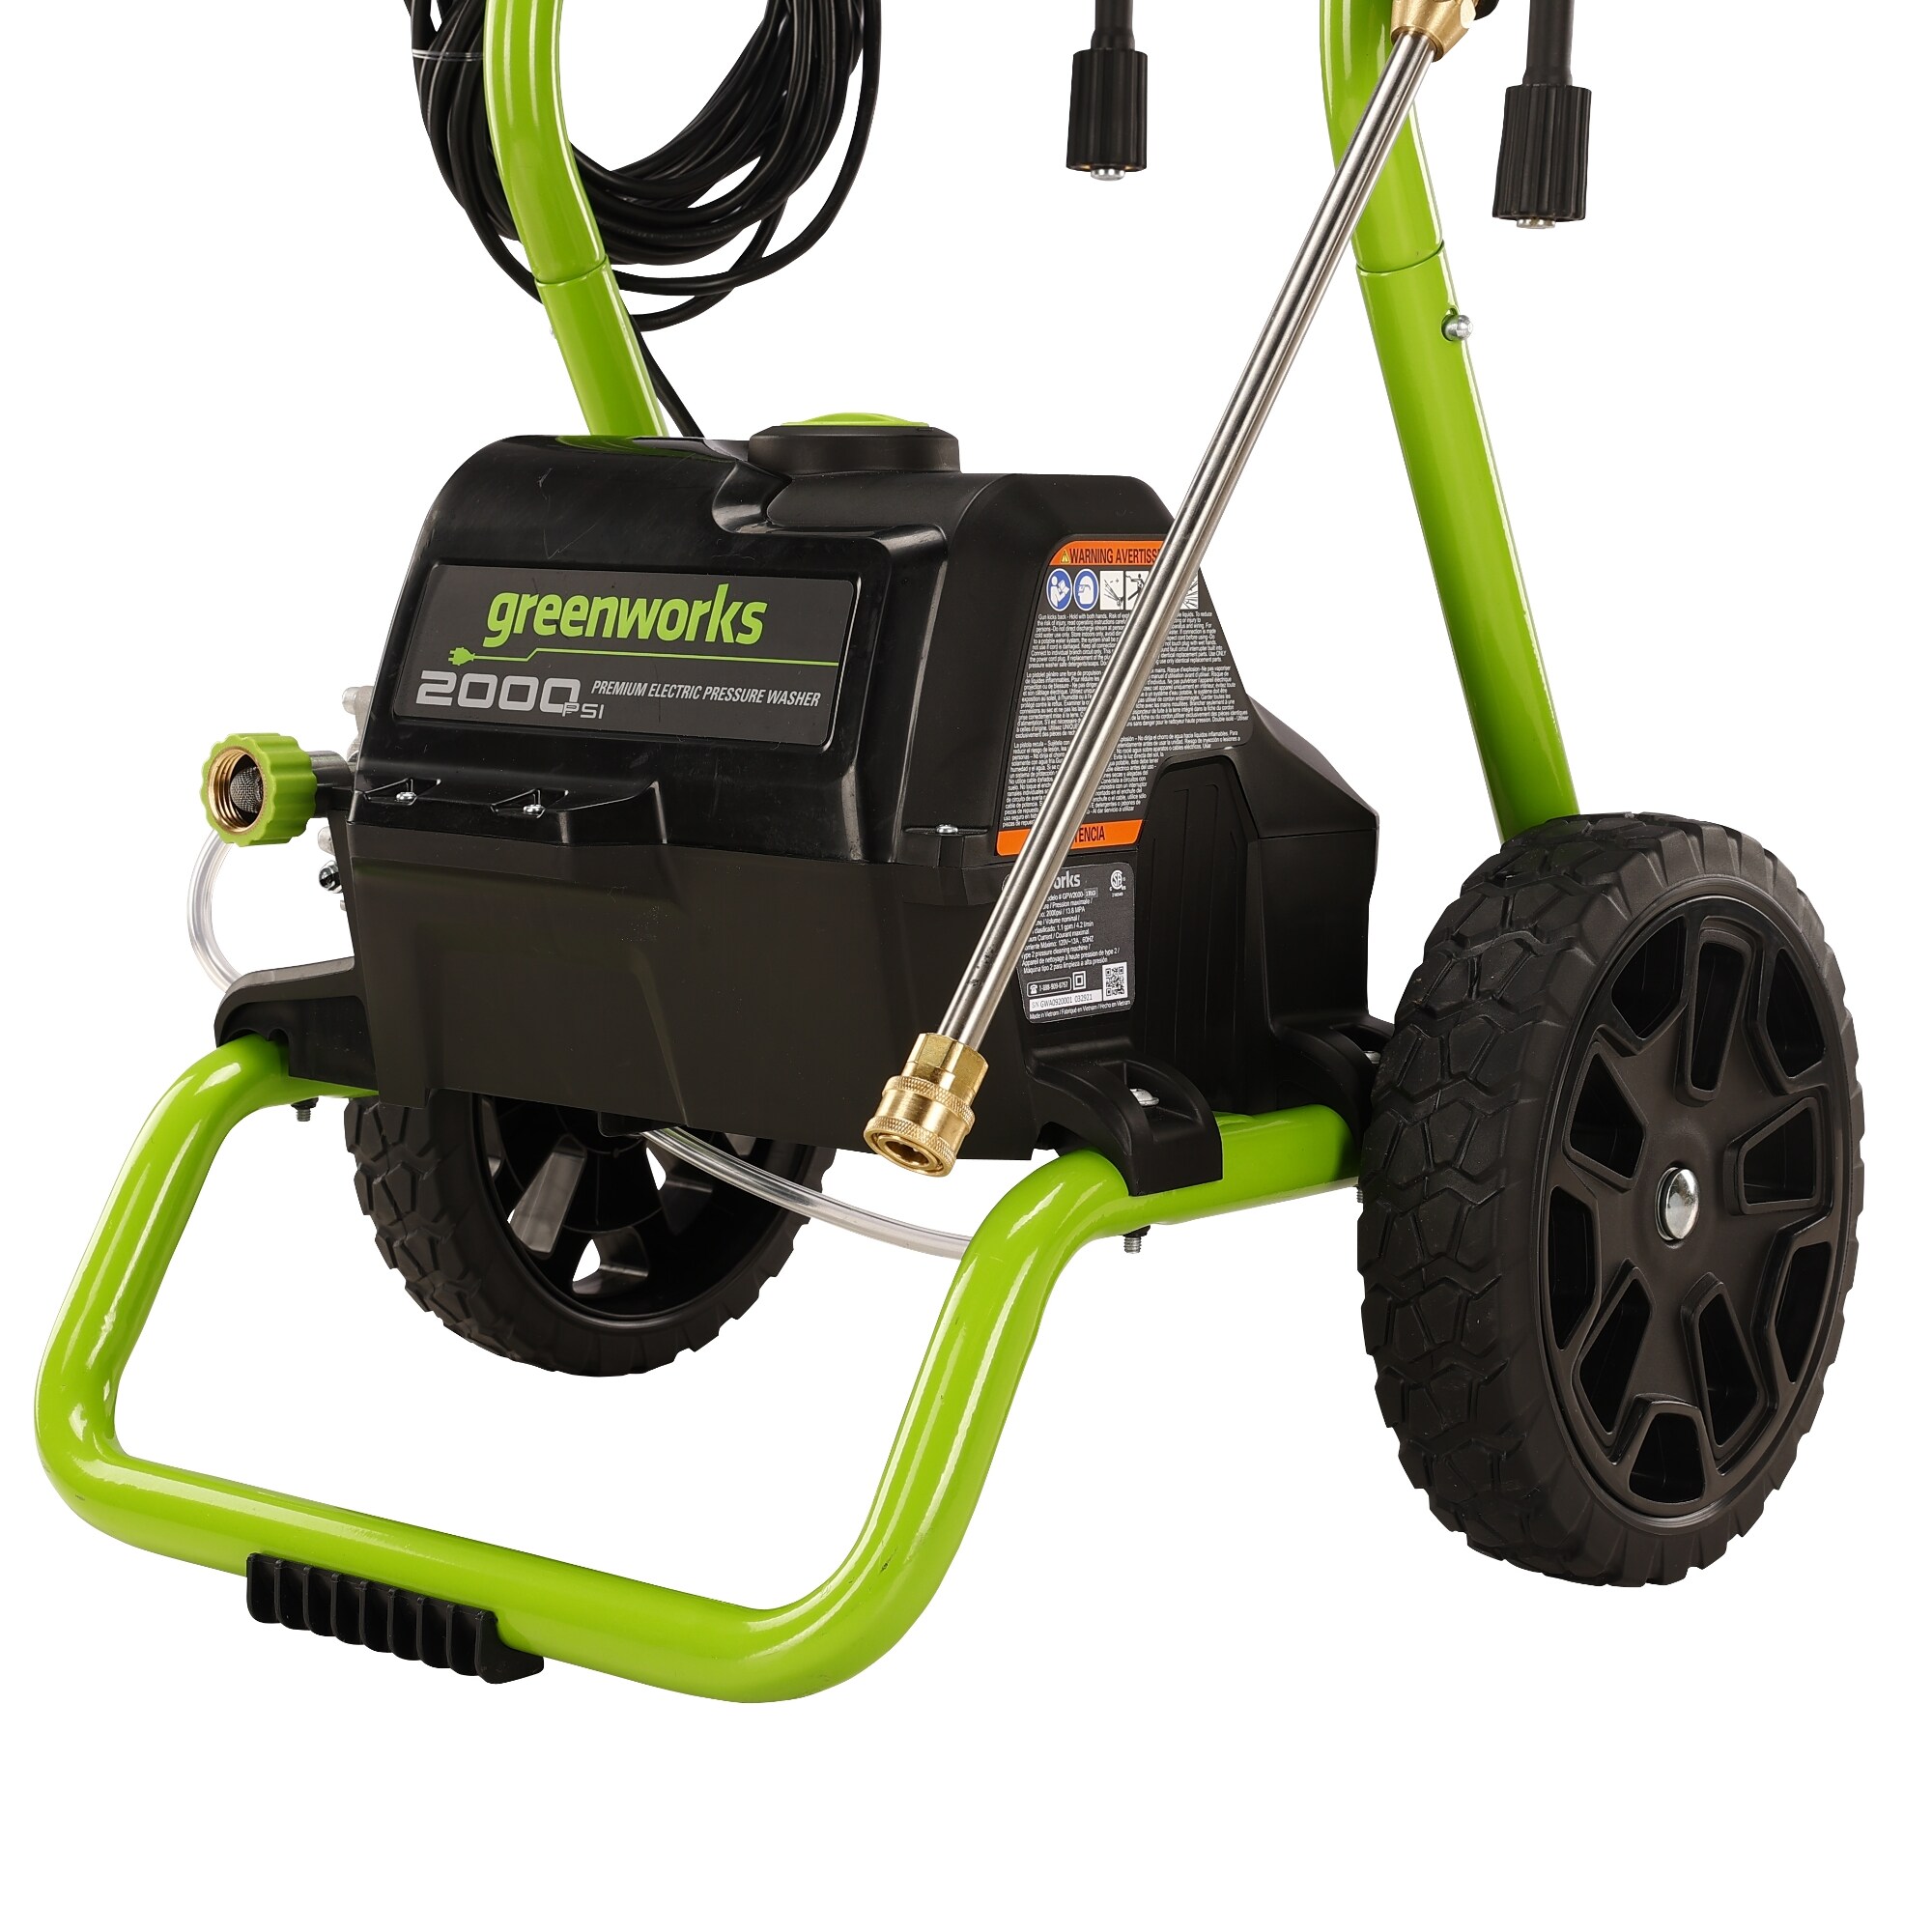 Greenworks 2000 Max PSI @ 1.1 GPM (13 Amp) Electric Pressure Washer  GPW2000-1RG + Greenworks Surface Cleaner Universal Pressure Washer  Attachment